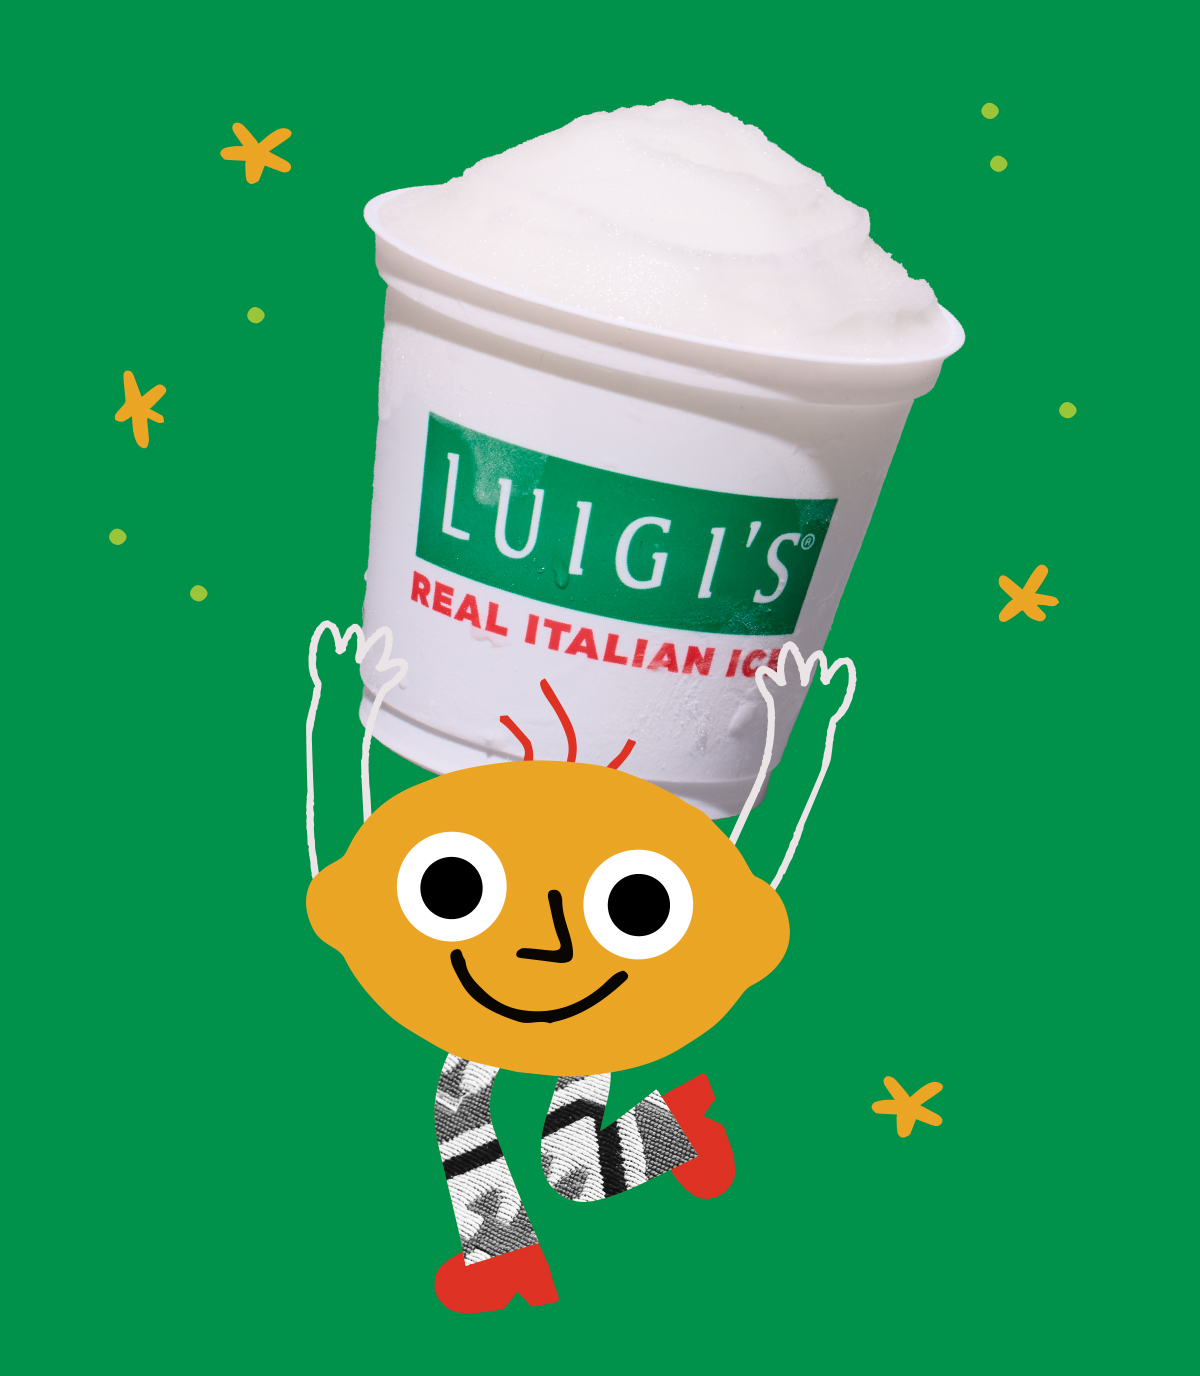 Graphic of cute lemon character holding a LUIGI'S Real Italian Ice cup. The Italian ice is lemon flavored. The lemon graphic is smiling, has little hairs, and is wearing pants and red shoes. The background is green and there are little stars around the image.